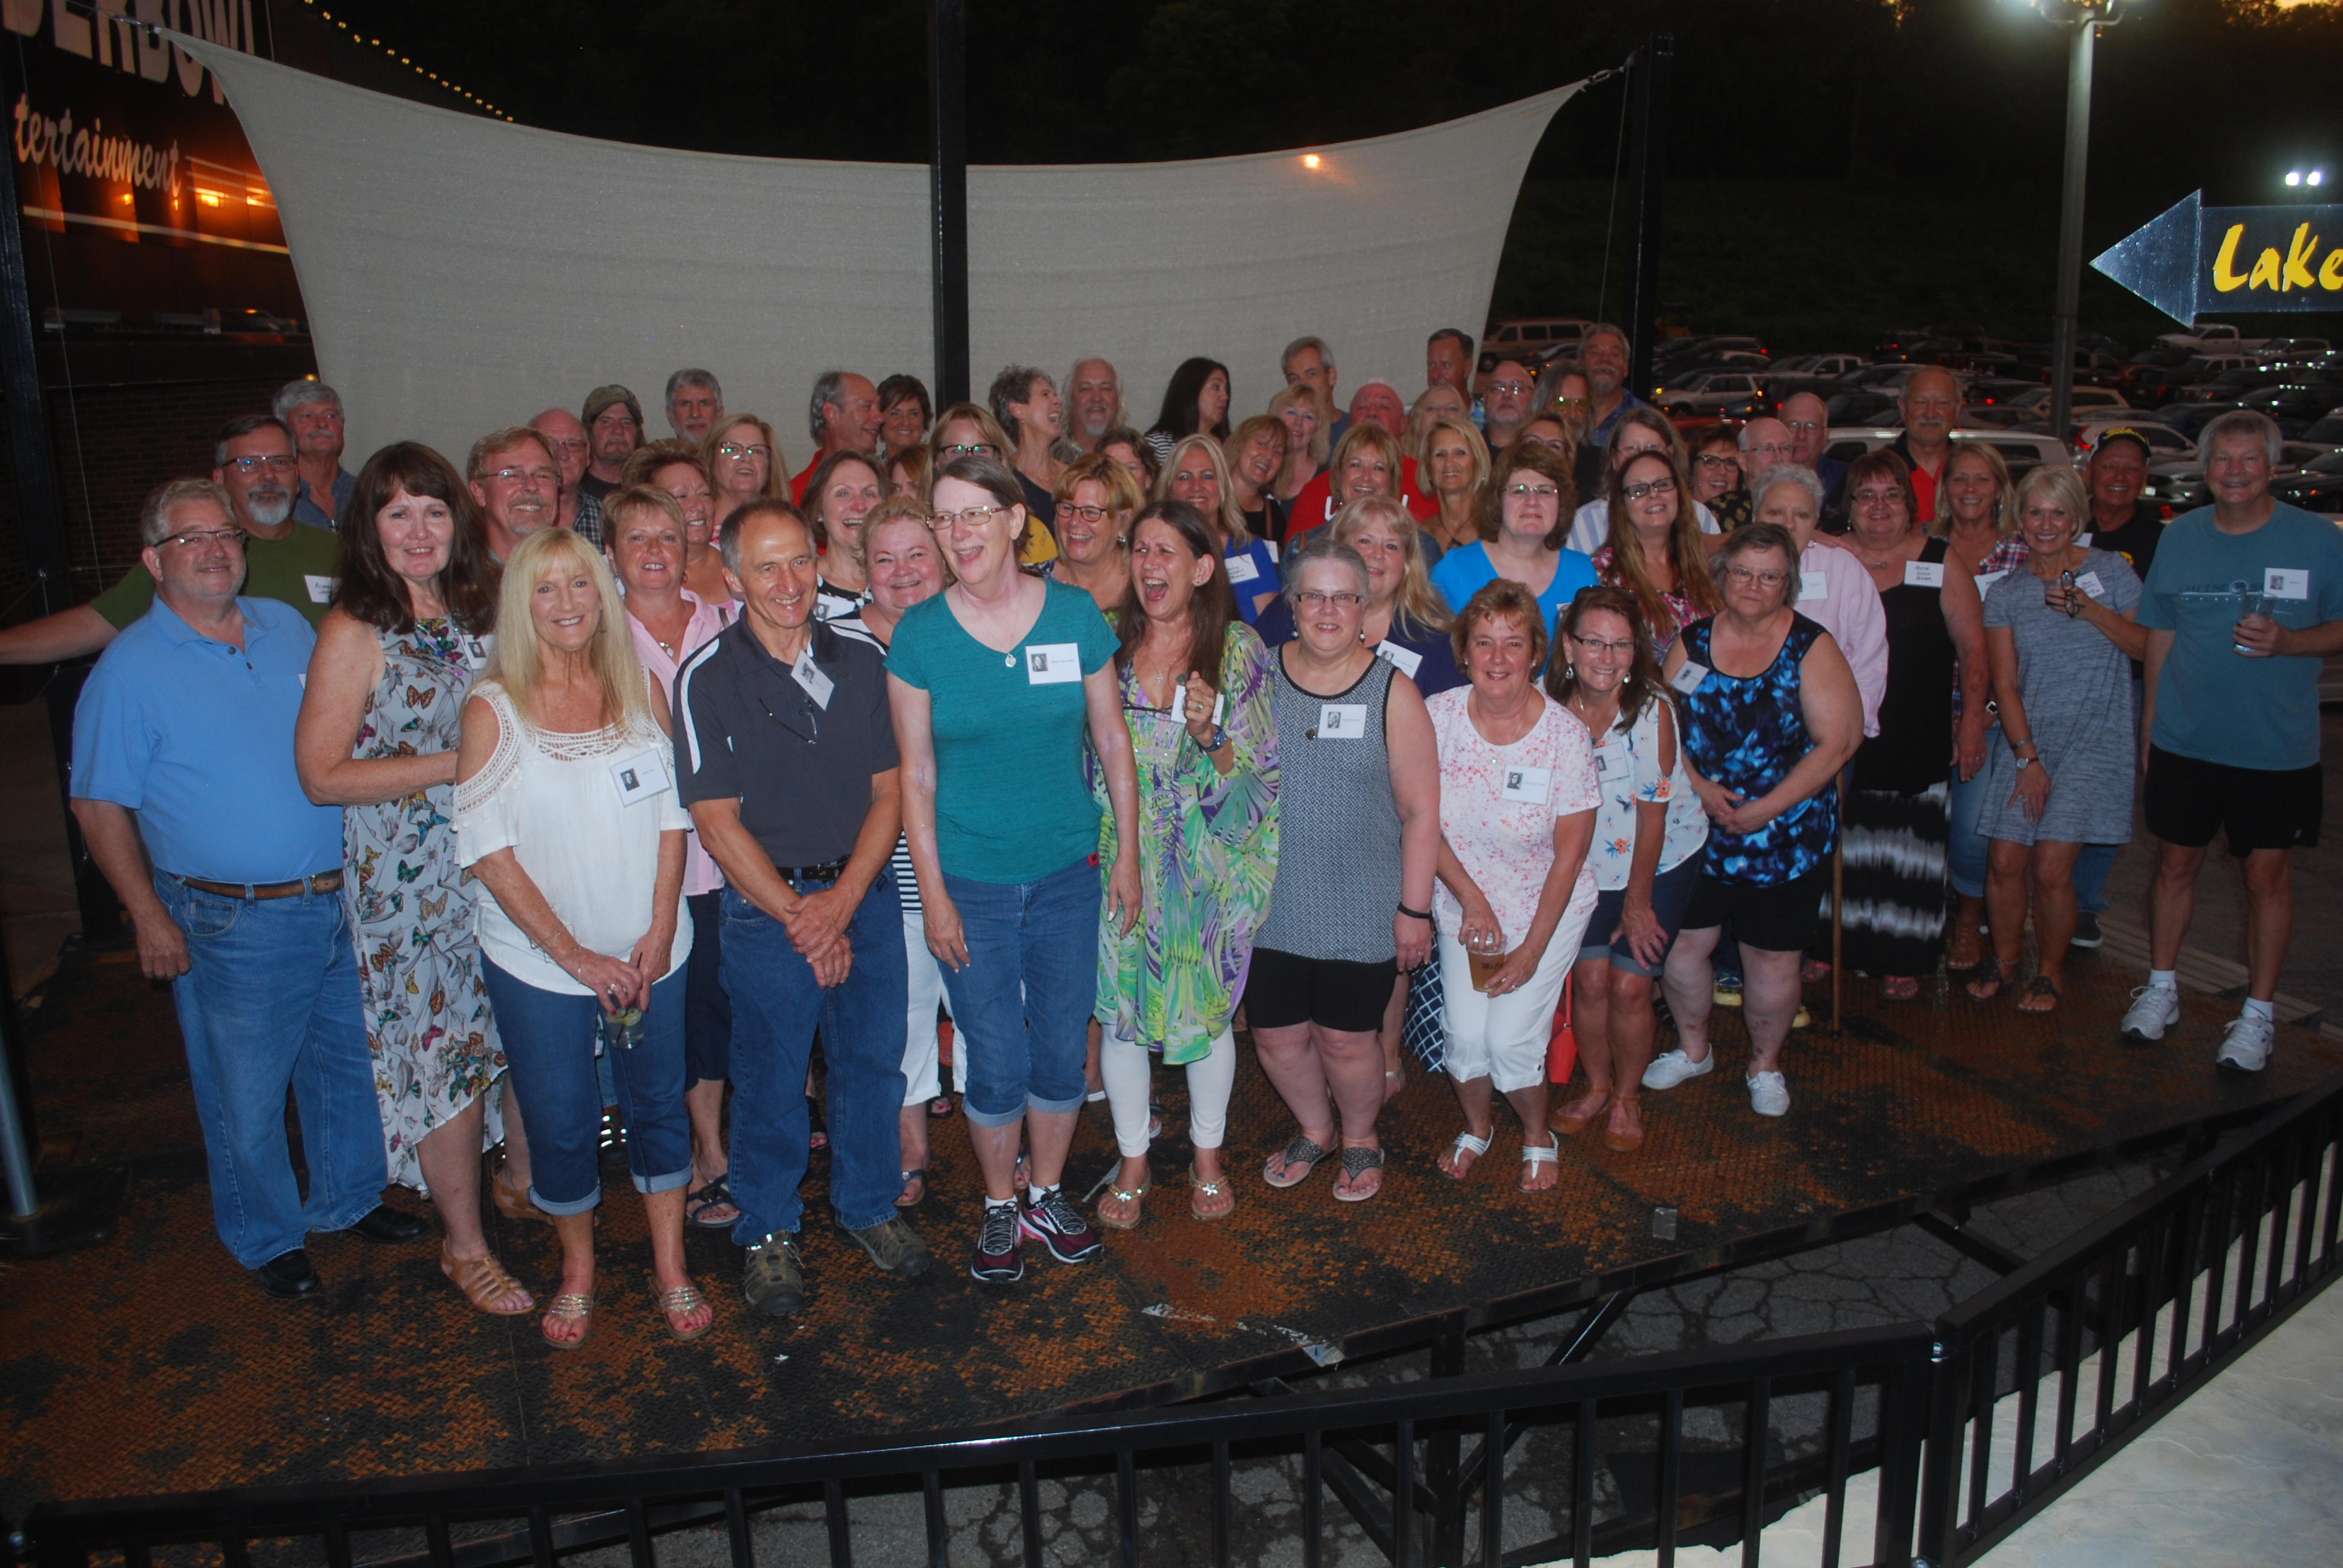 Friday Night of our 45th Reunion. Look at those smiles!!